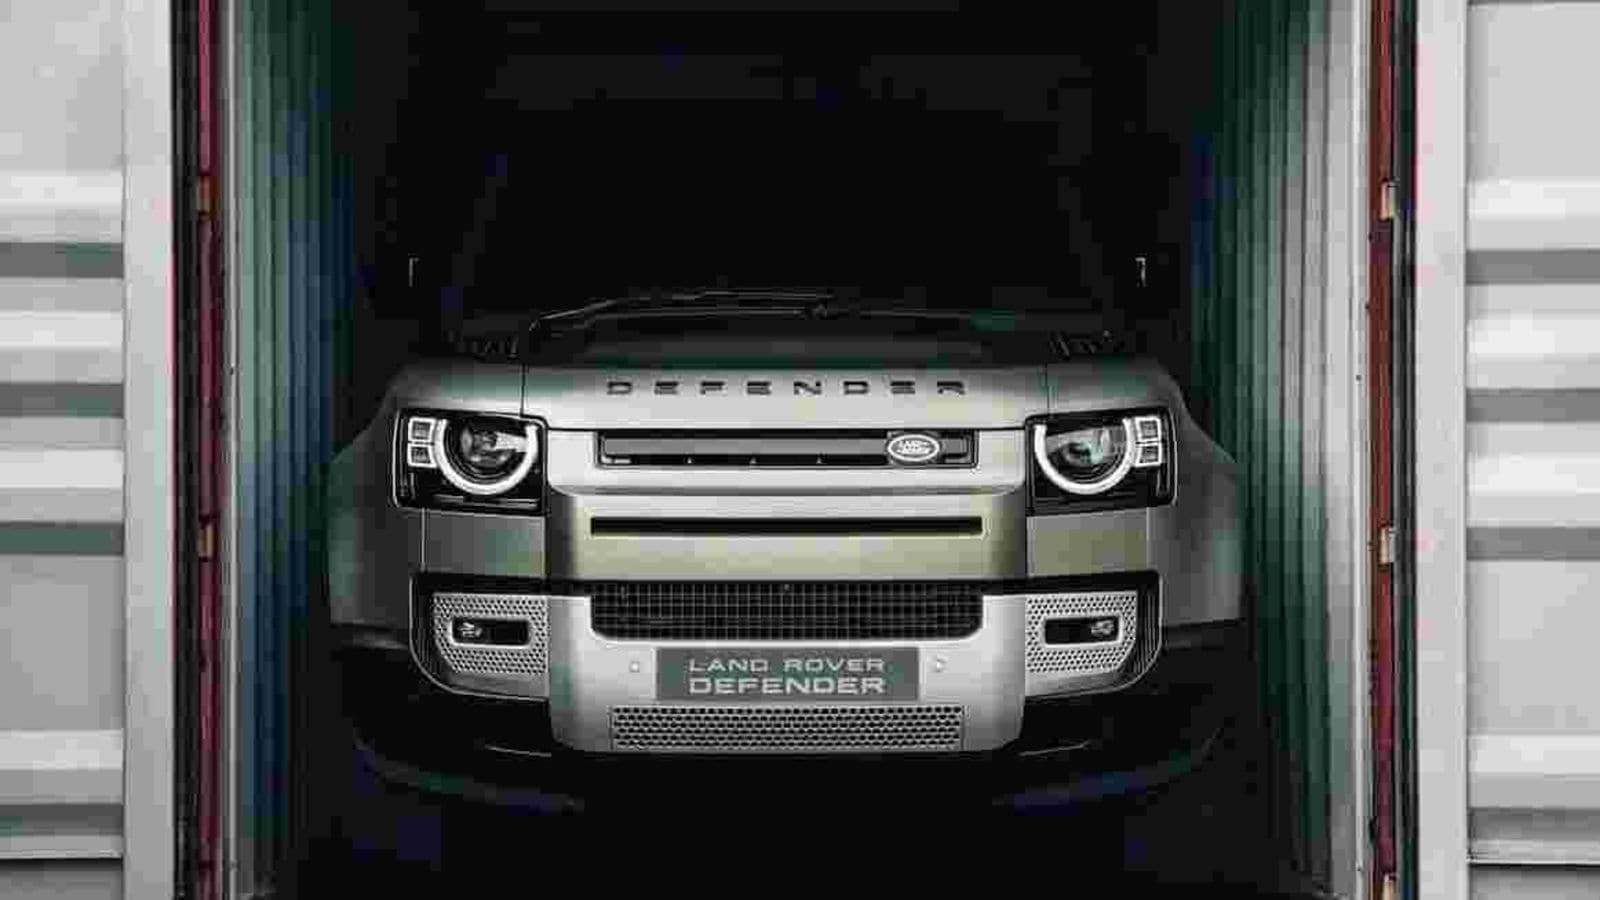 Land Rover Defender launched in India: Highlights